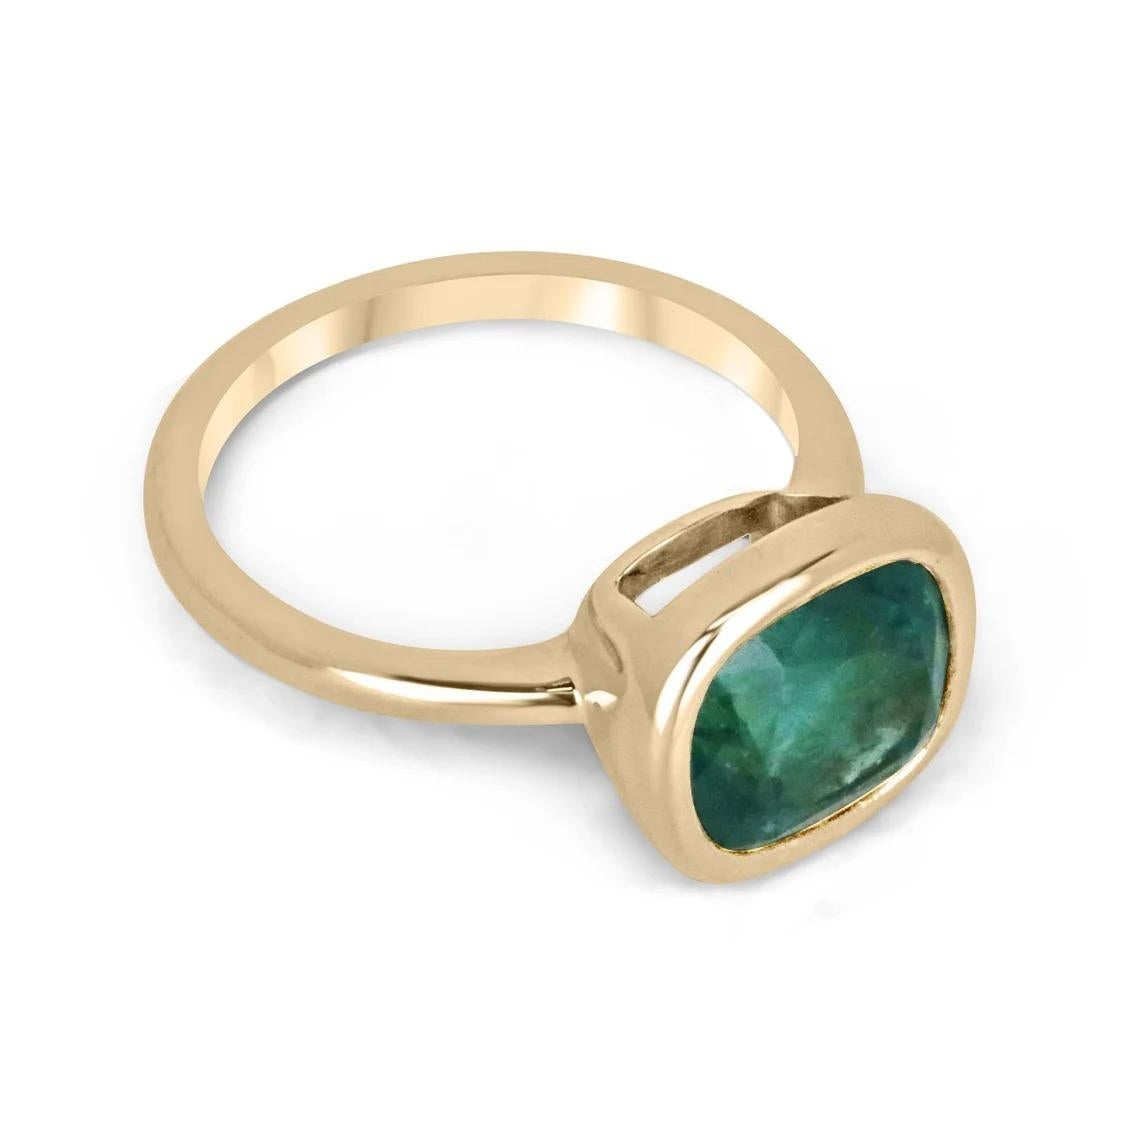 Introducing a captivating solitaire emerald ring that exudes elegance and charm. At its heart lies a remarkable 3.83-carat cushion-cut emerald, boasting a deep ocean green color with a subtle blue tint, reminiscent of serene waters. With good